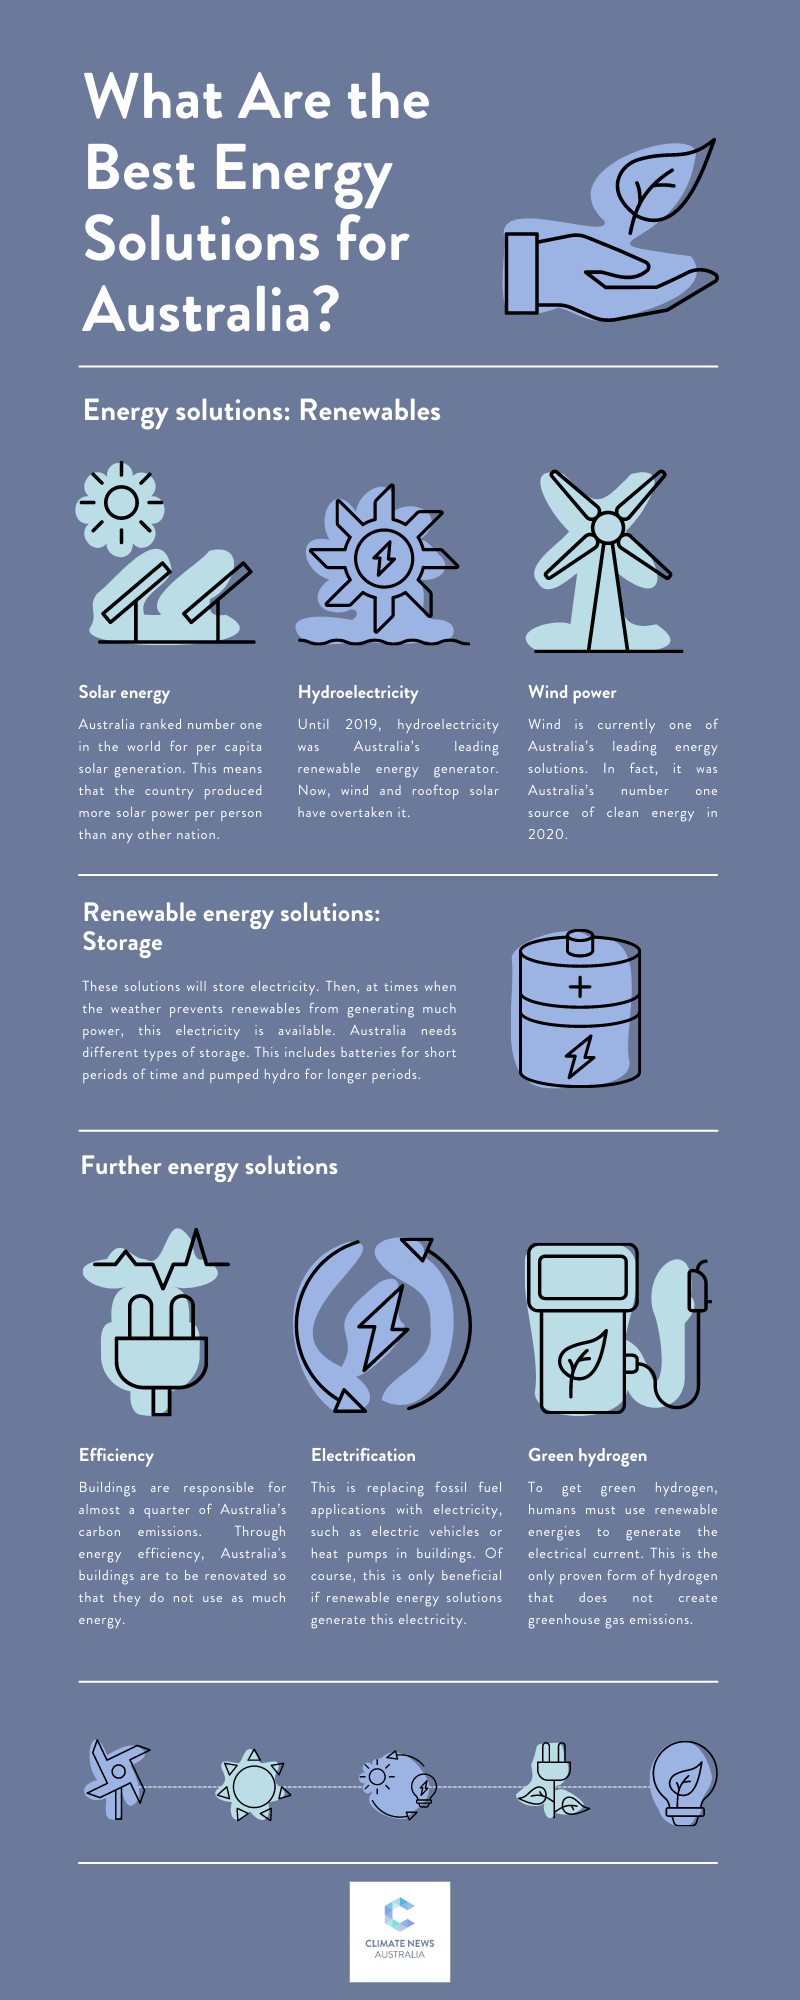 Infographic about the best energy solutions for Australia